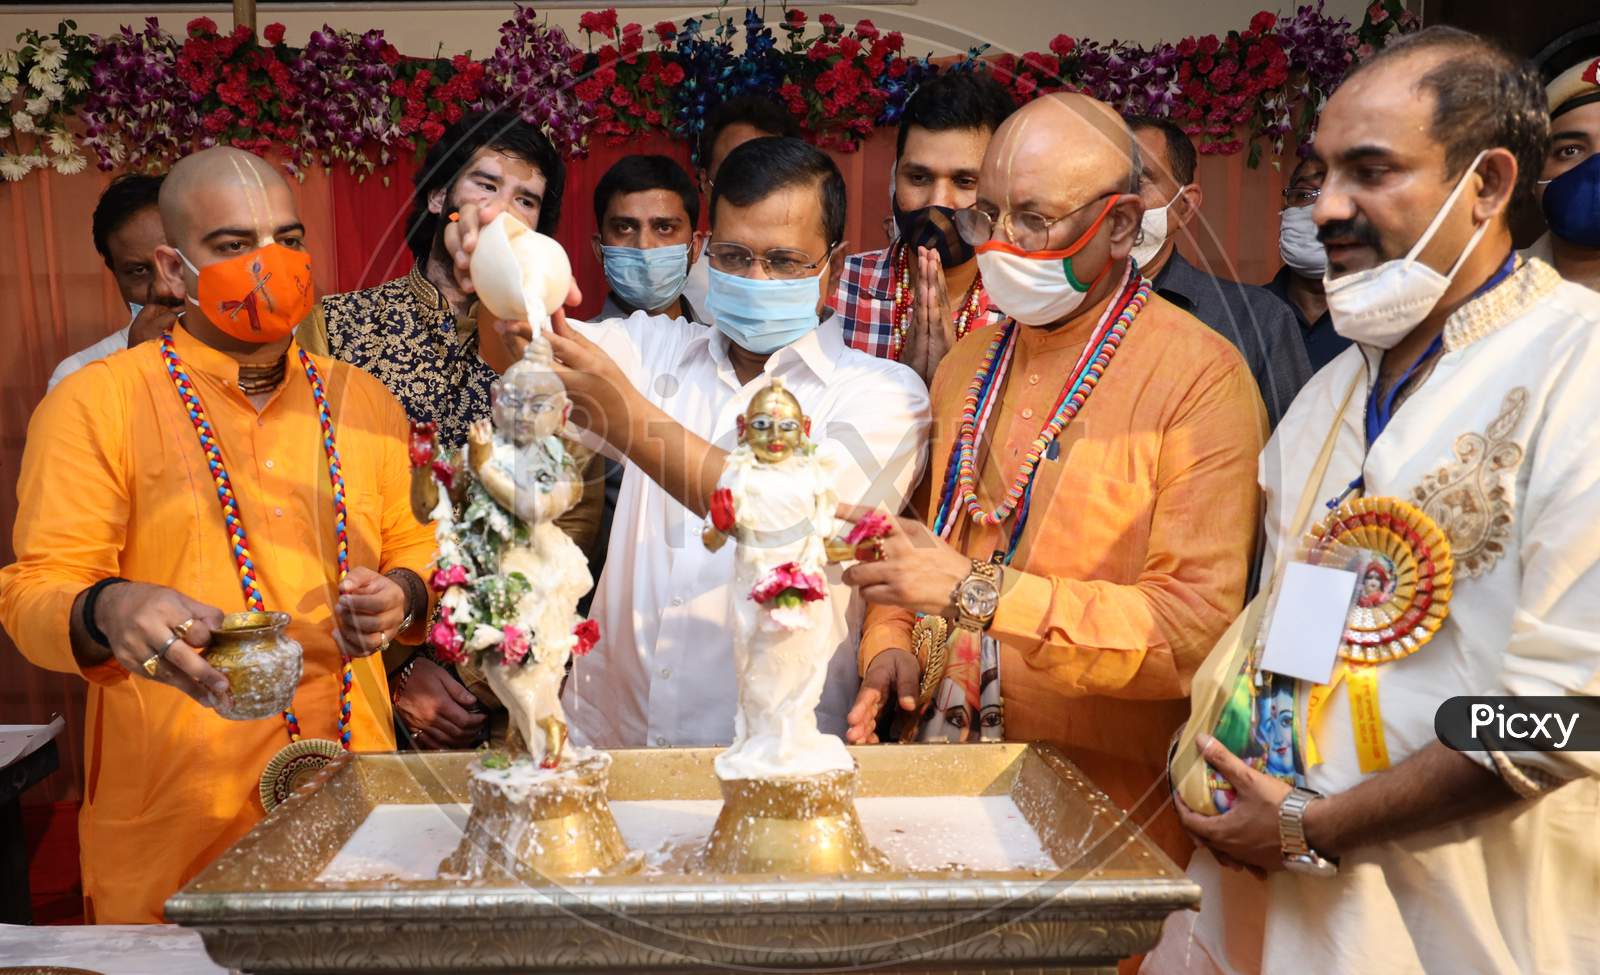 Delhi Chief Minister Arvind Kejriwal Pours Milk Onto The Idol Of Hindu Lord Krishna On The Occasion Of The 'Janmashtami' Festival, Marking Krishna's Birth, At ISKCON Temple In New Delhi On August 12, 2020.